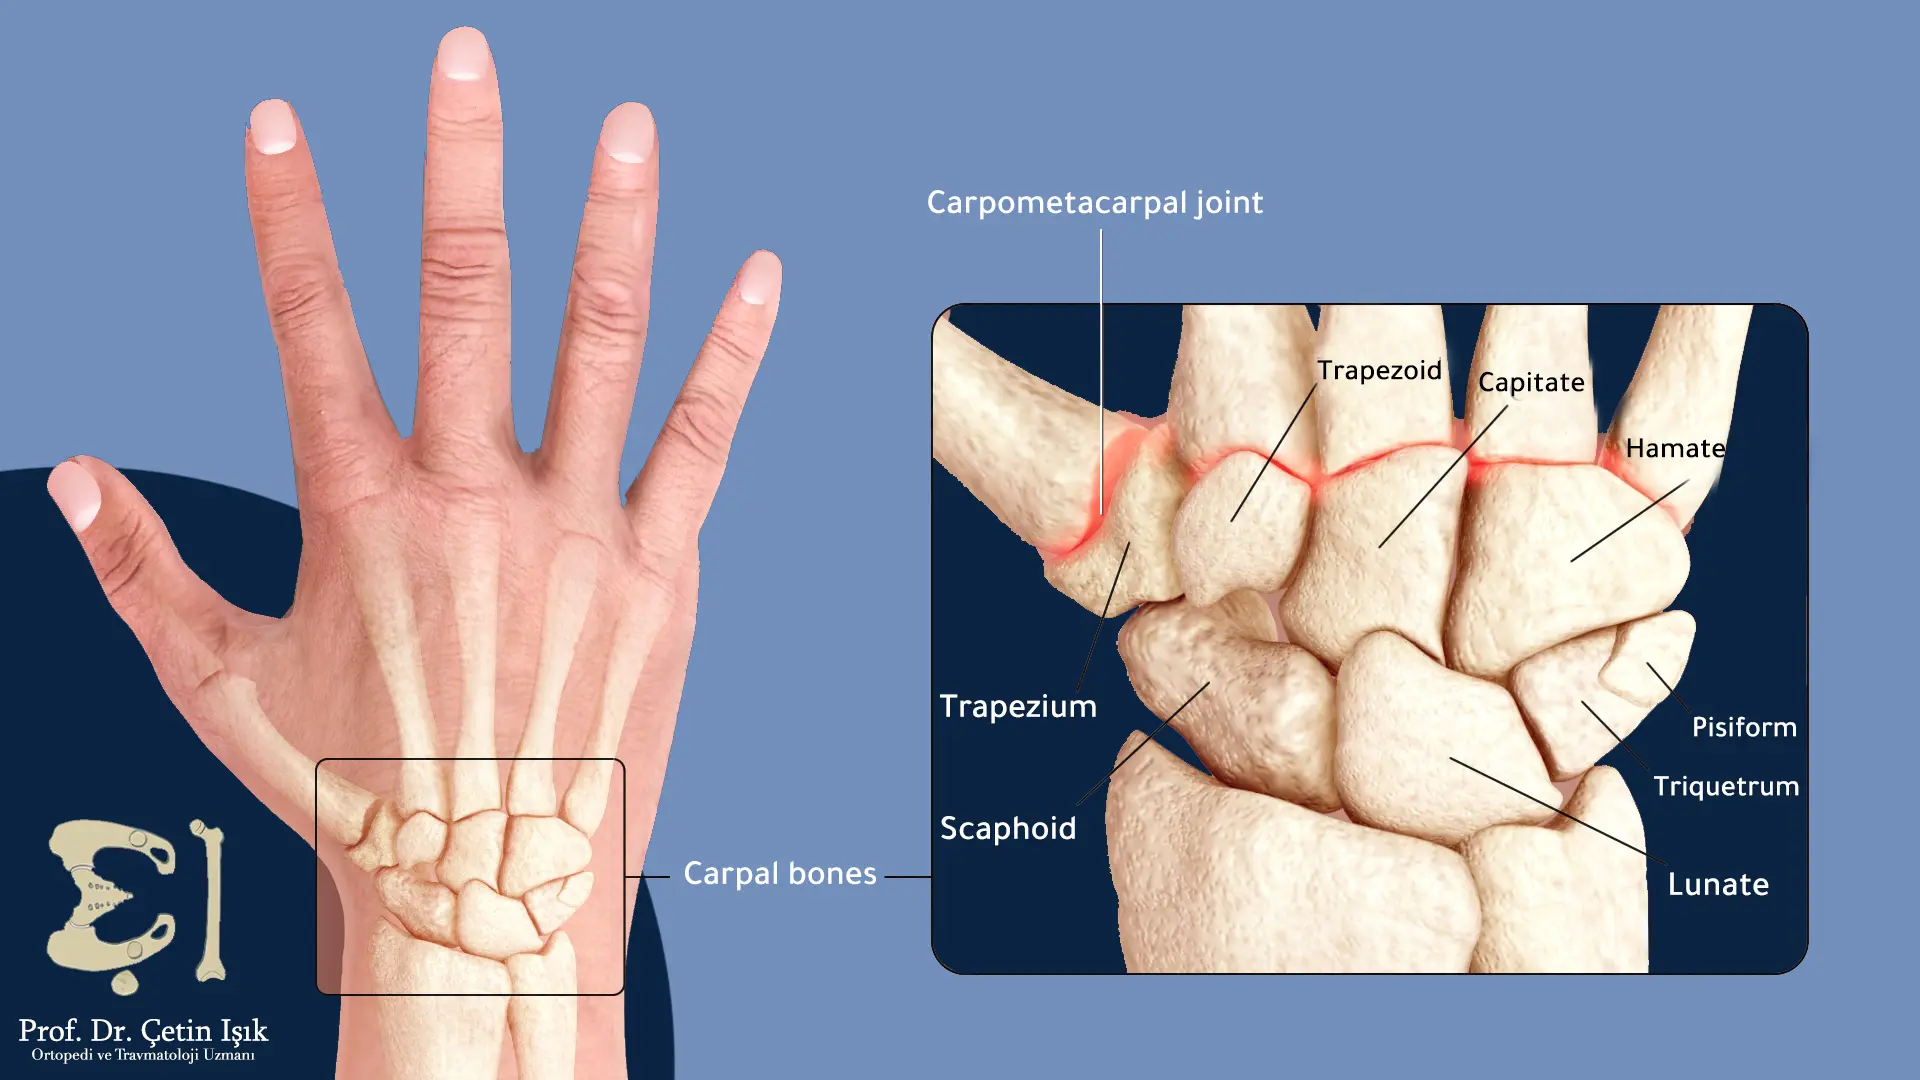 An image showing the carpal bones and the carpal joint between the carpal and metacarpal bones